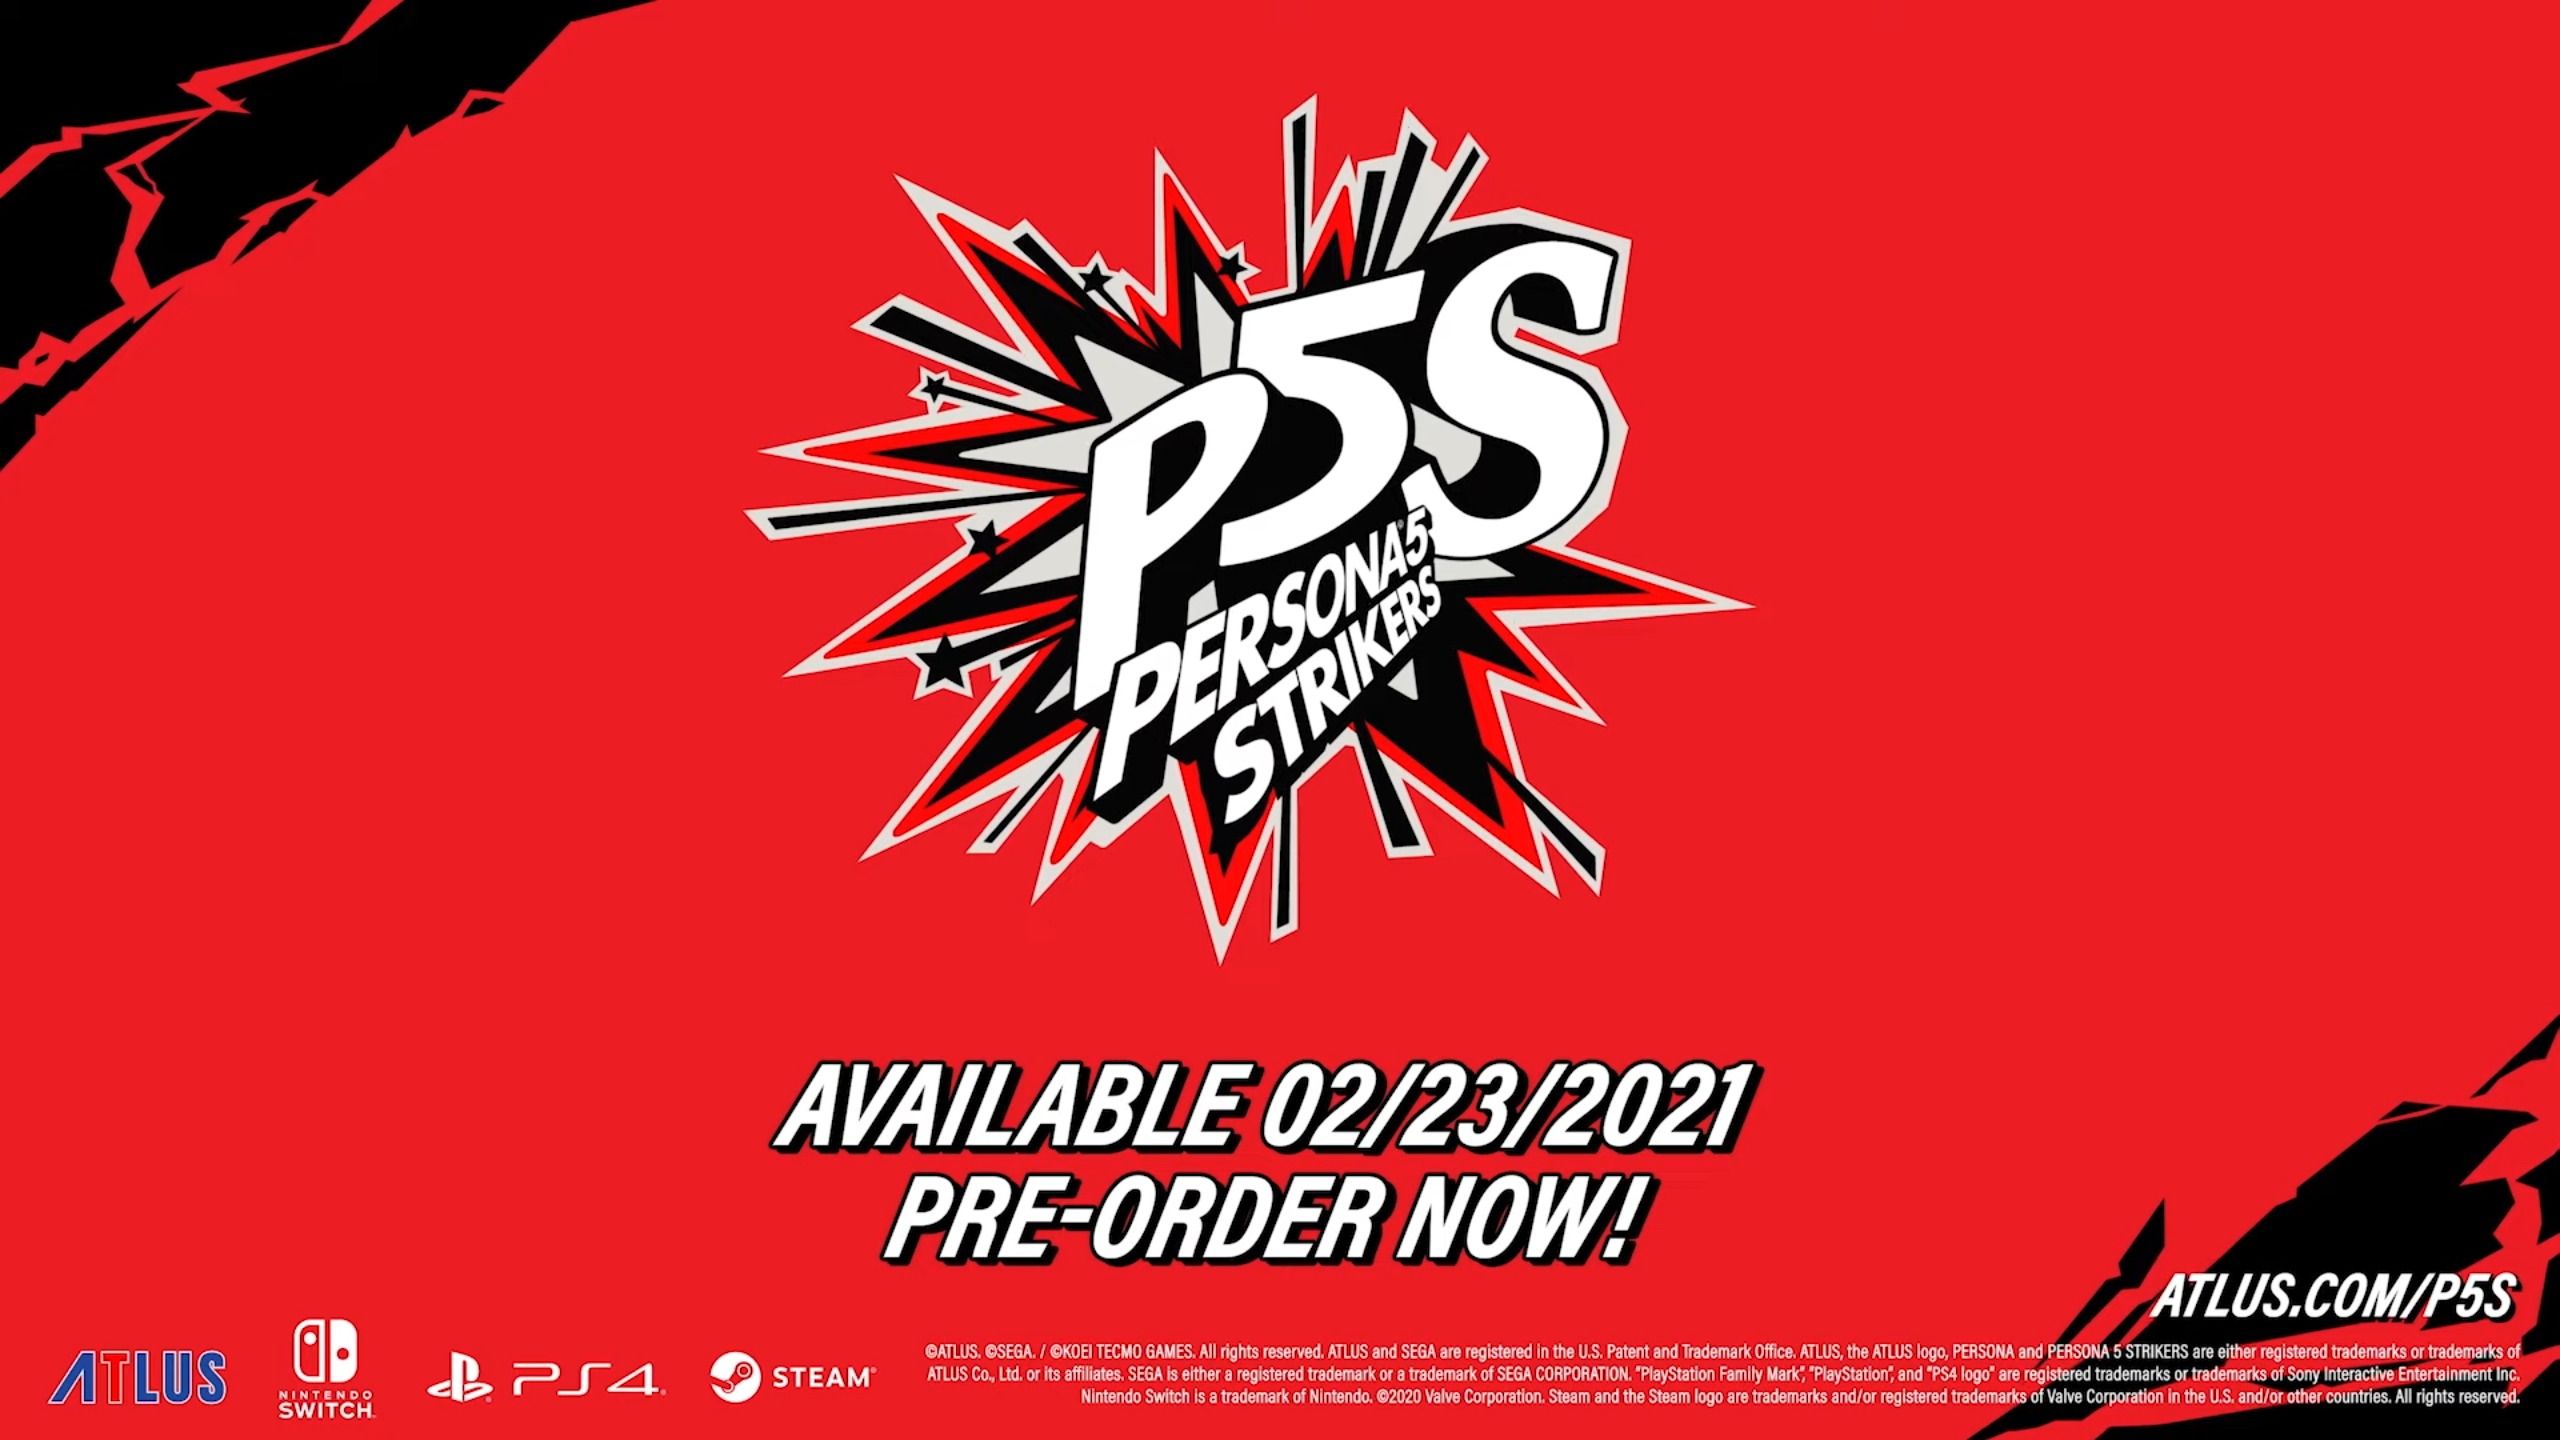 Persona 5 Strikers for PS4, Switch, & PC Getting Western Release in February 2021 [UPDATED]